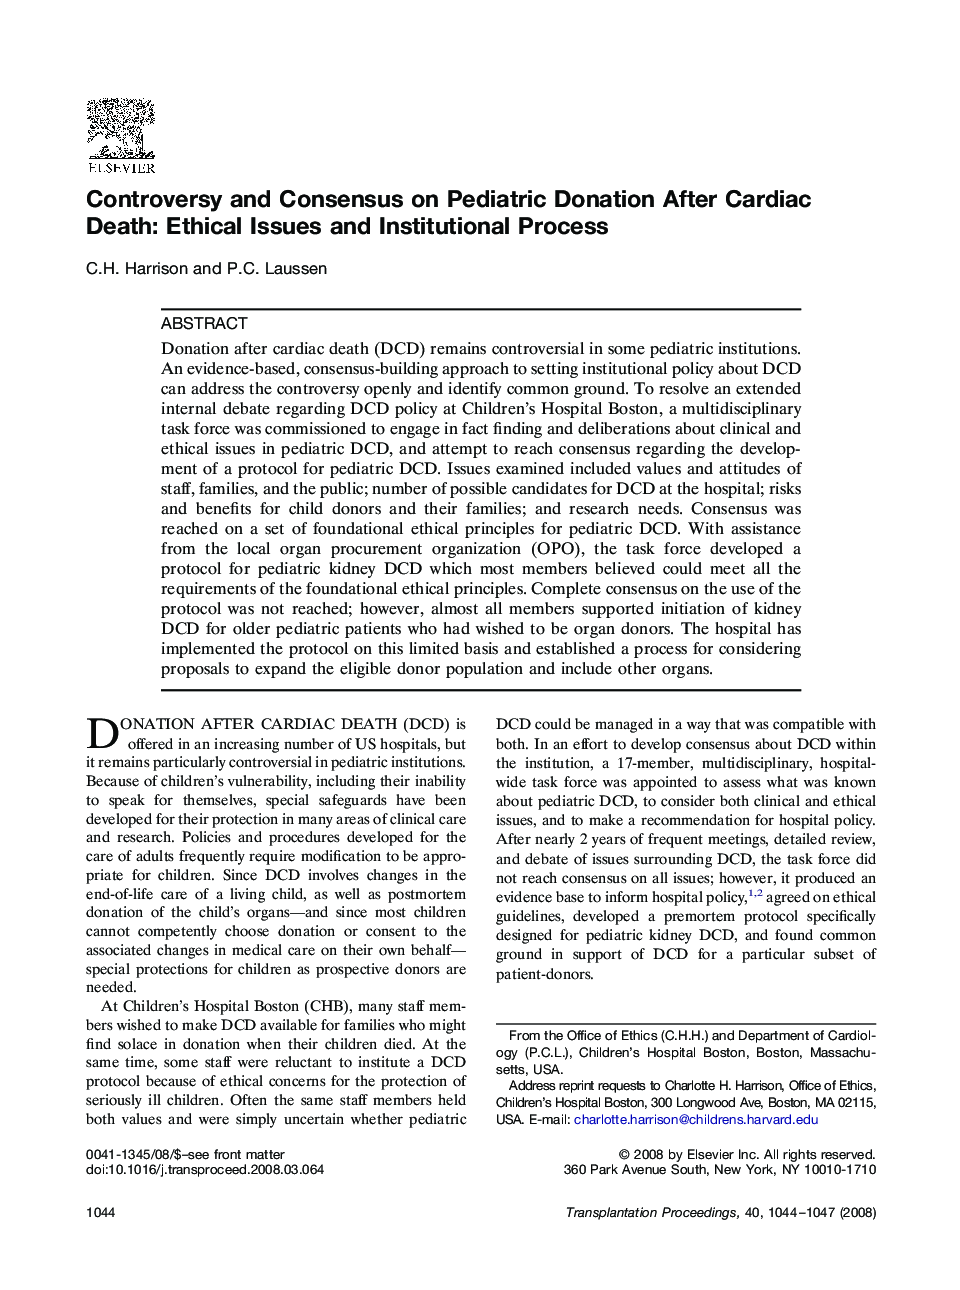 Controversy and Consensus on Pediatric Donation After Cardiac Death: Ethical Issues and Institutional Process